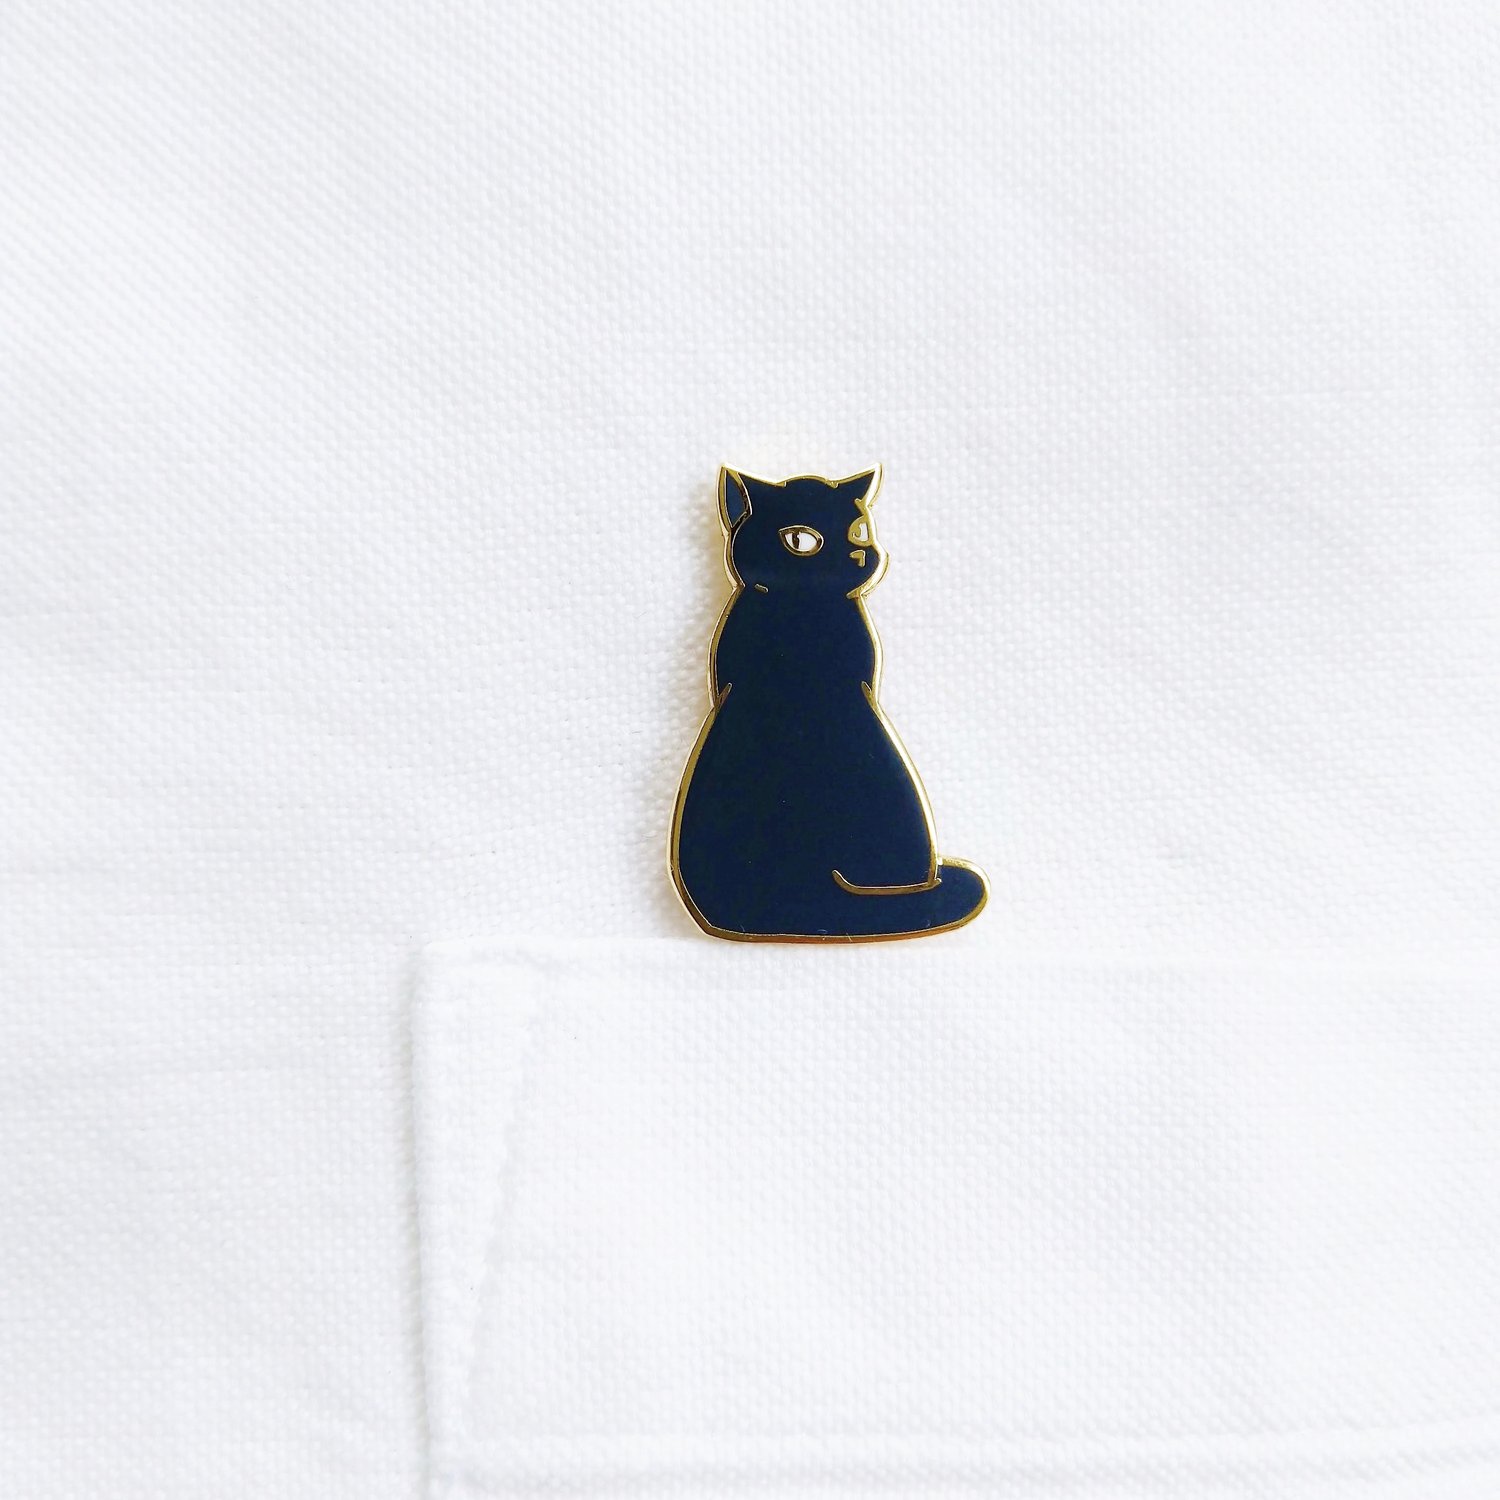 Image of Bounty the Cat Enamel Pin: Indifference 